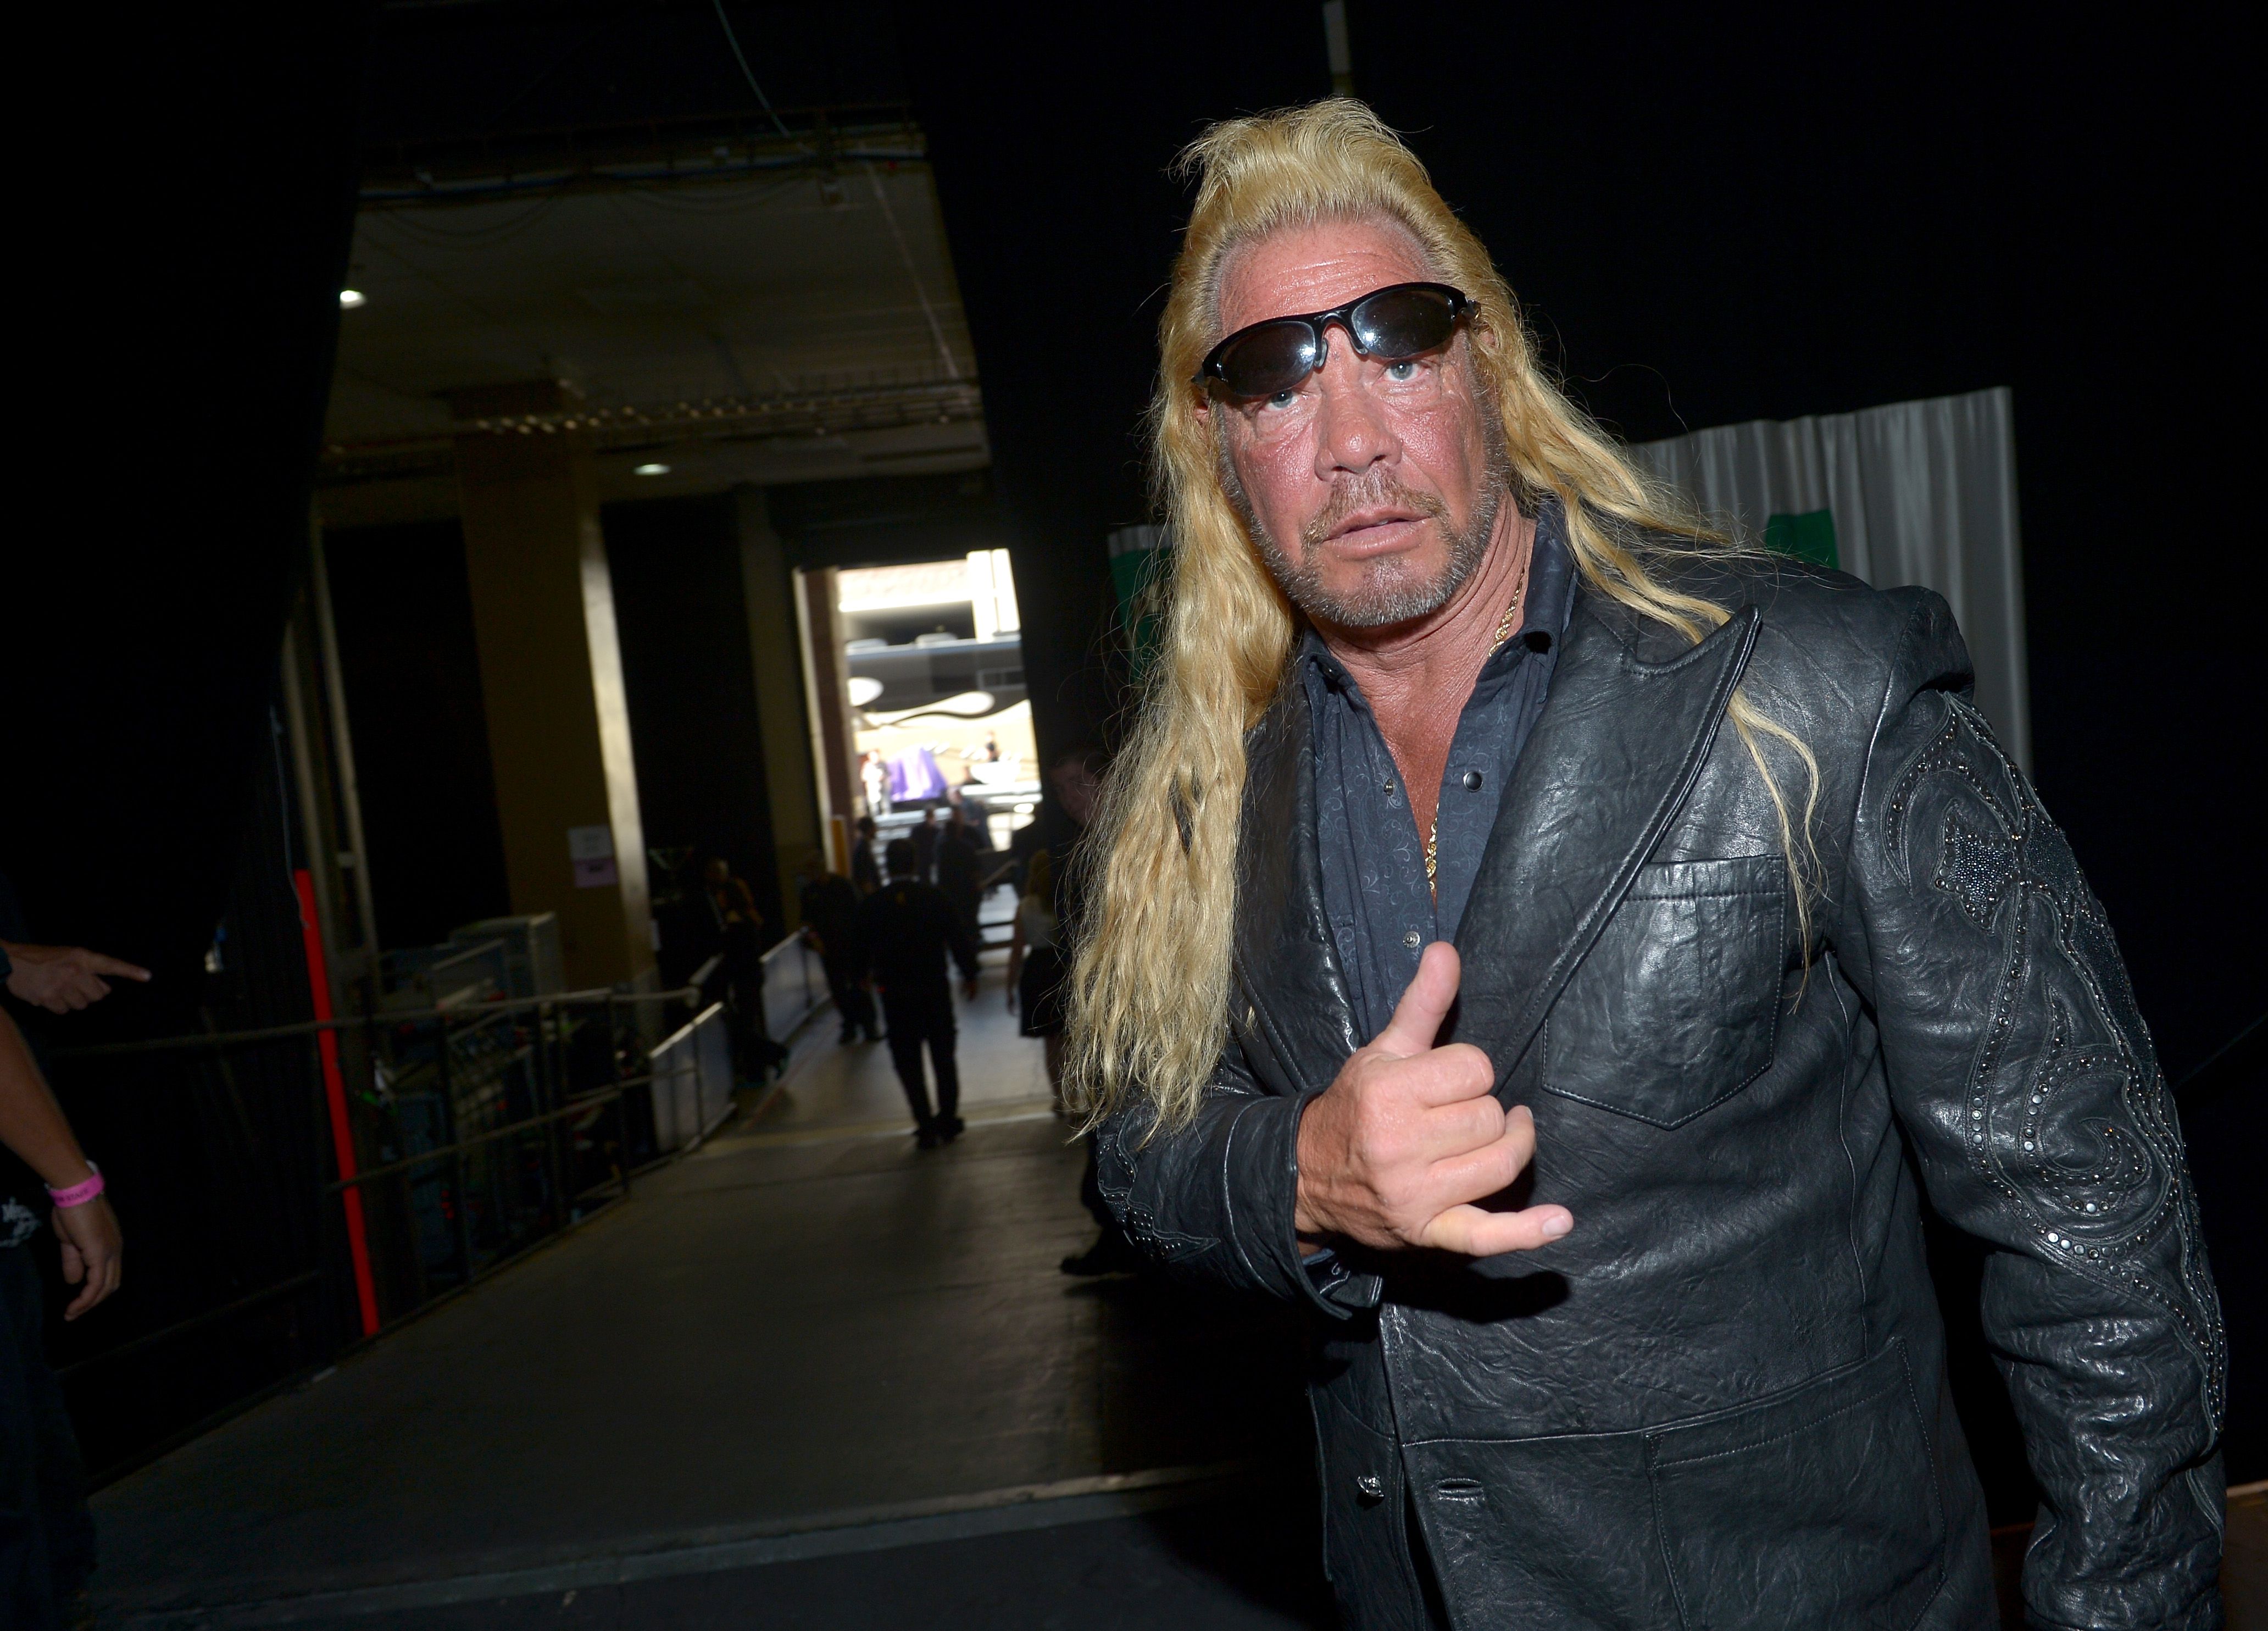  Dog the Bounty Hunter during the 48th Annual Academy of Country Music Awards at the MGM Grand Garden Arena on April 7, 2013 in Las Vegas, Nevada. | Source: Getty Images